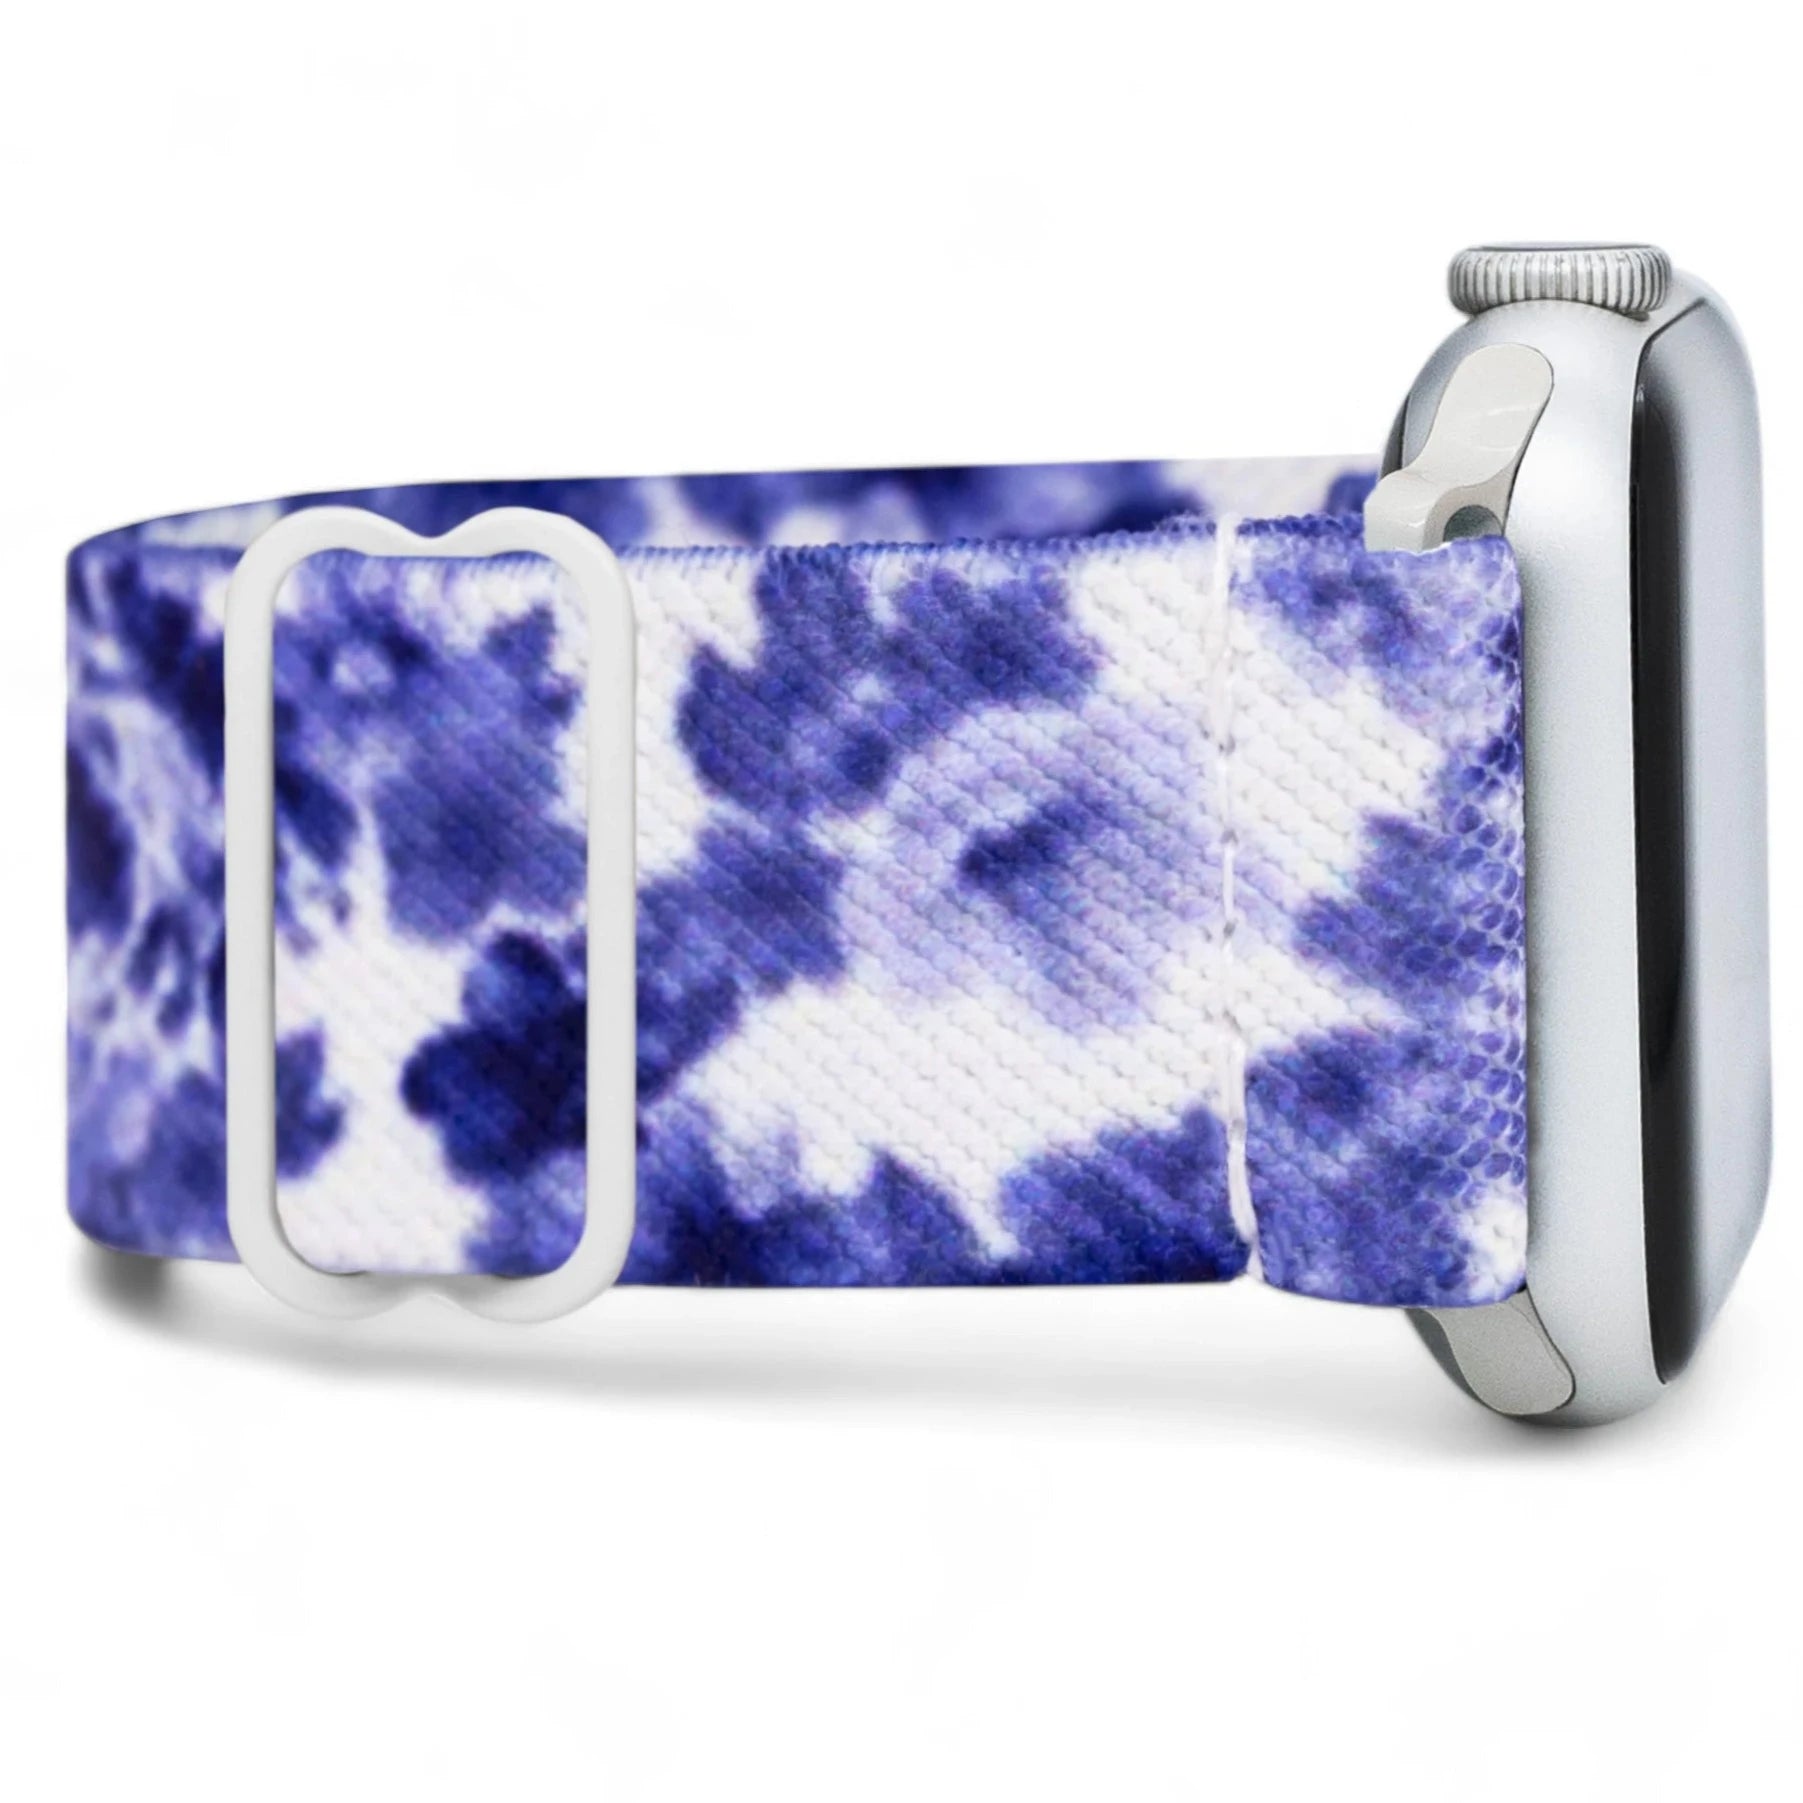 Floral Braxley Apple Watch Band in best sellers section